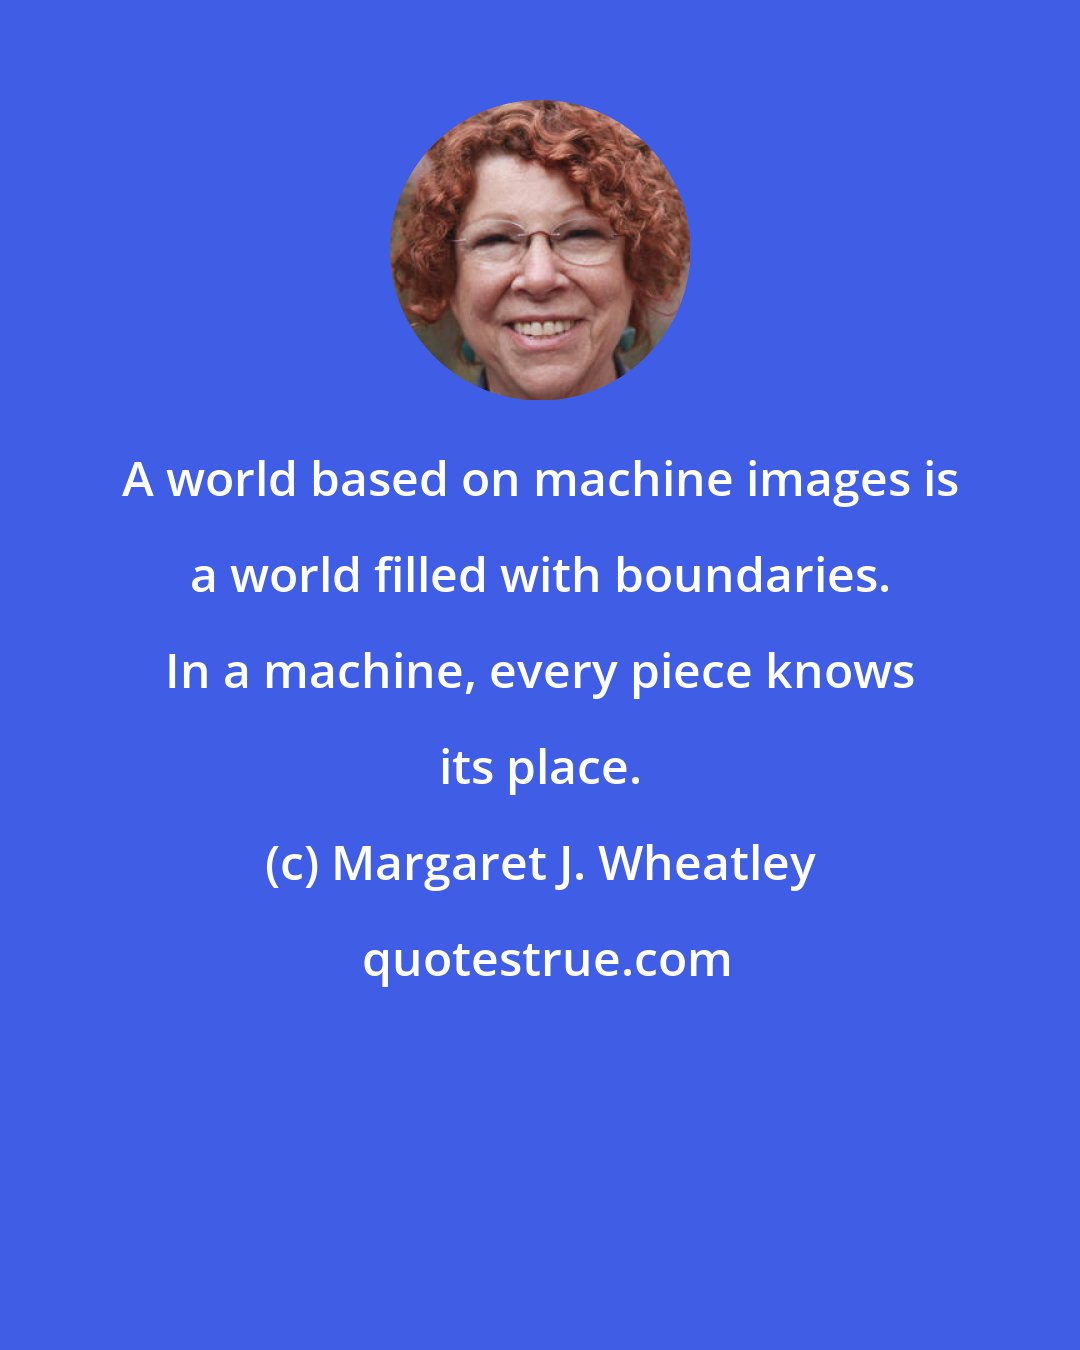 Margaret J. Wheatley: A world based on machine images is a world filled with boundaries. In a machine, every piece knows its place.